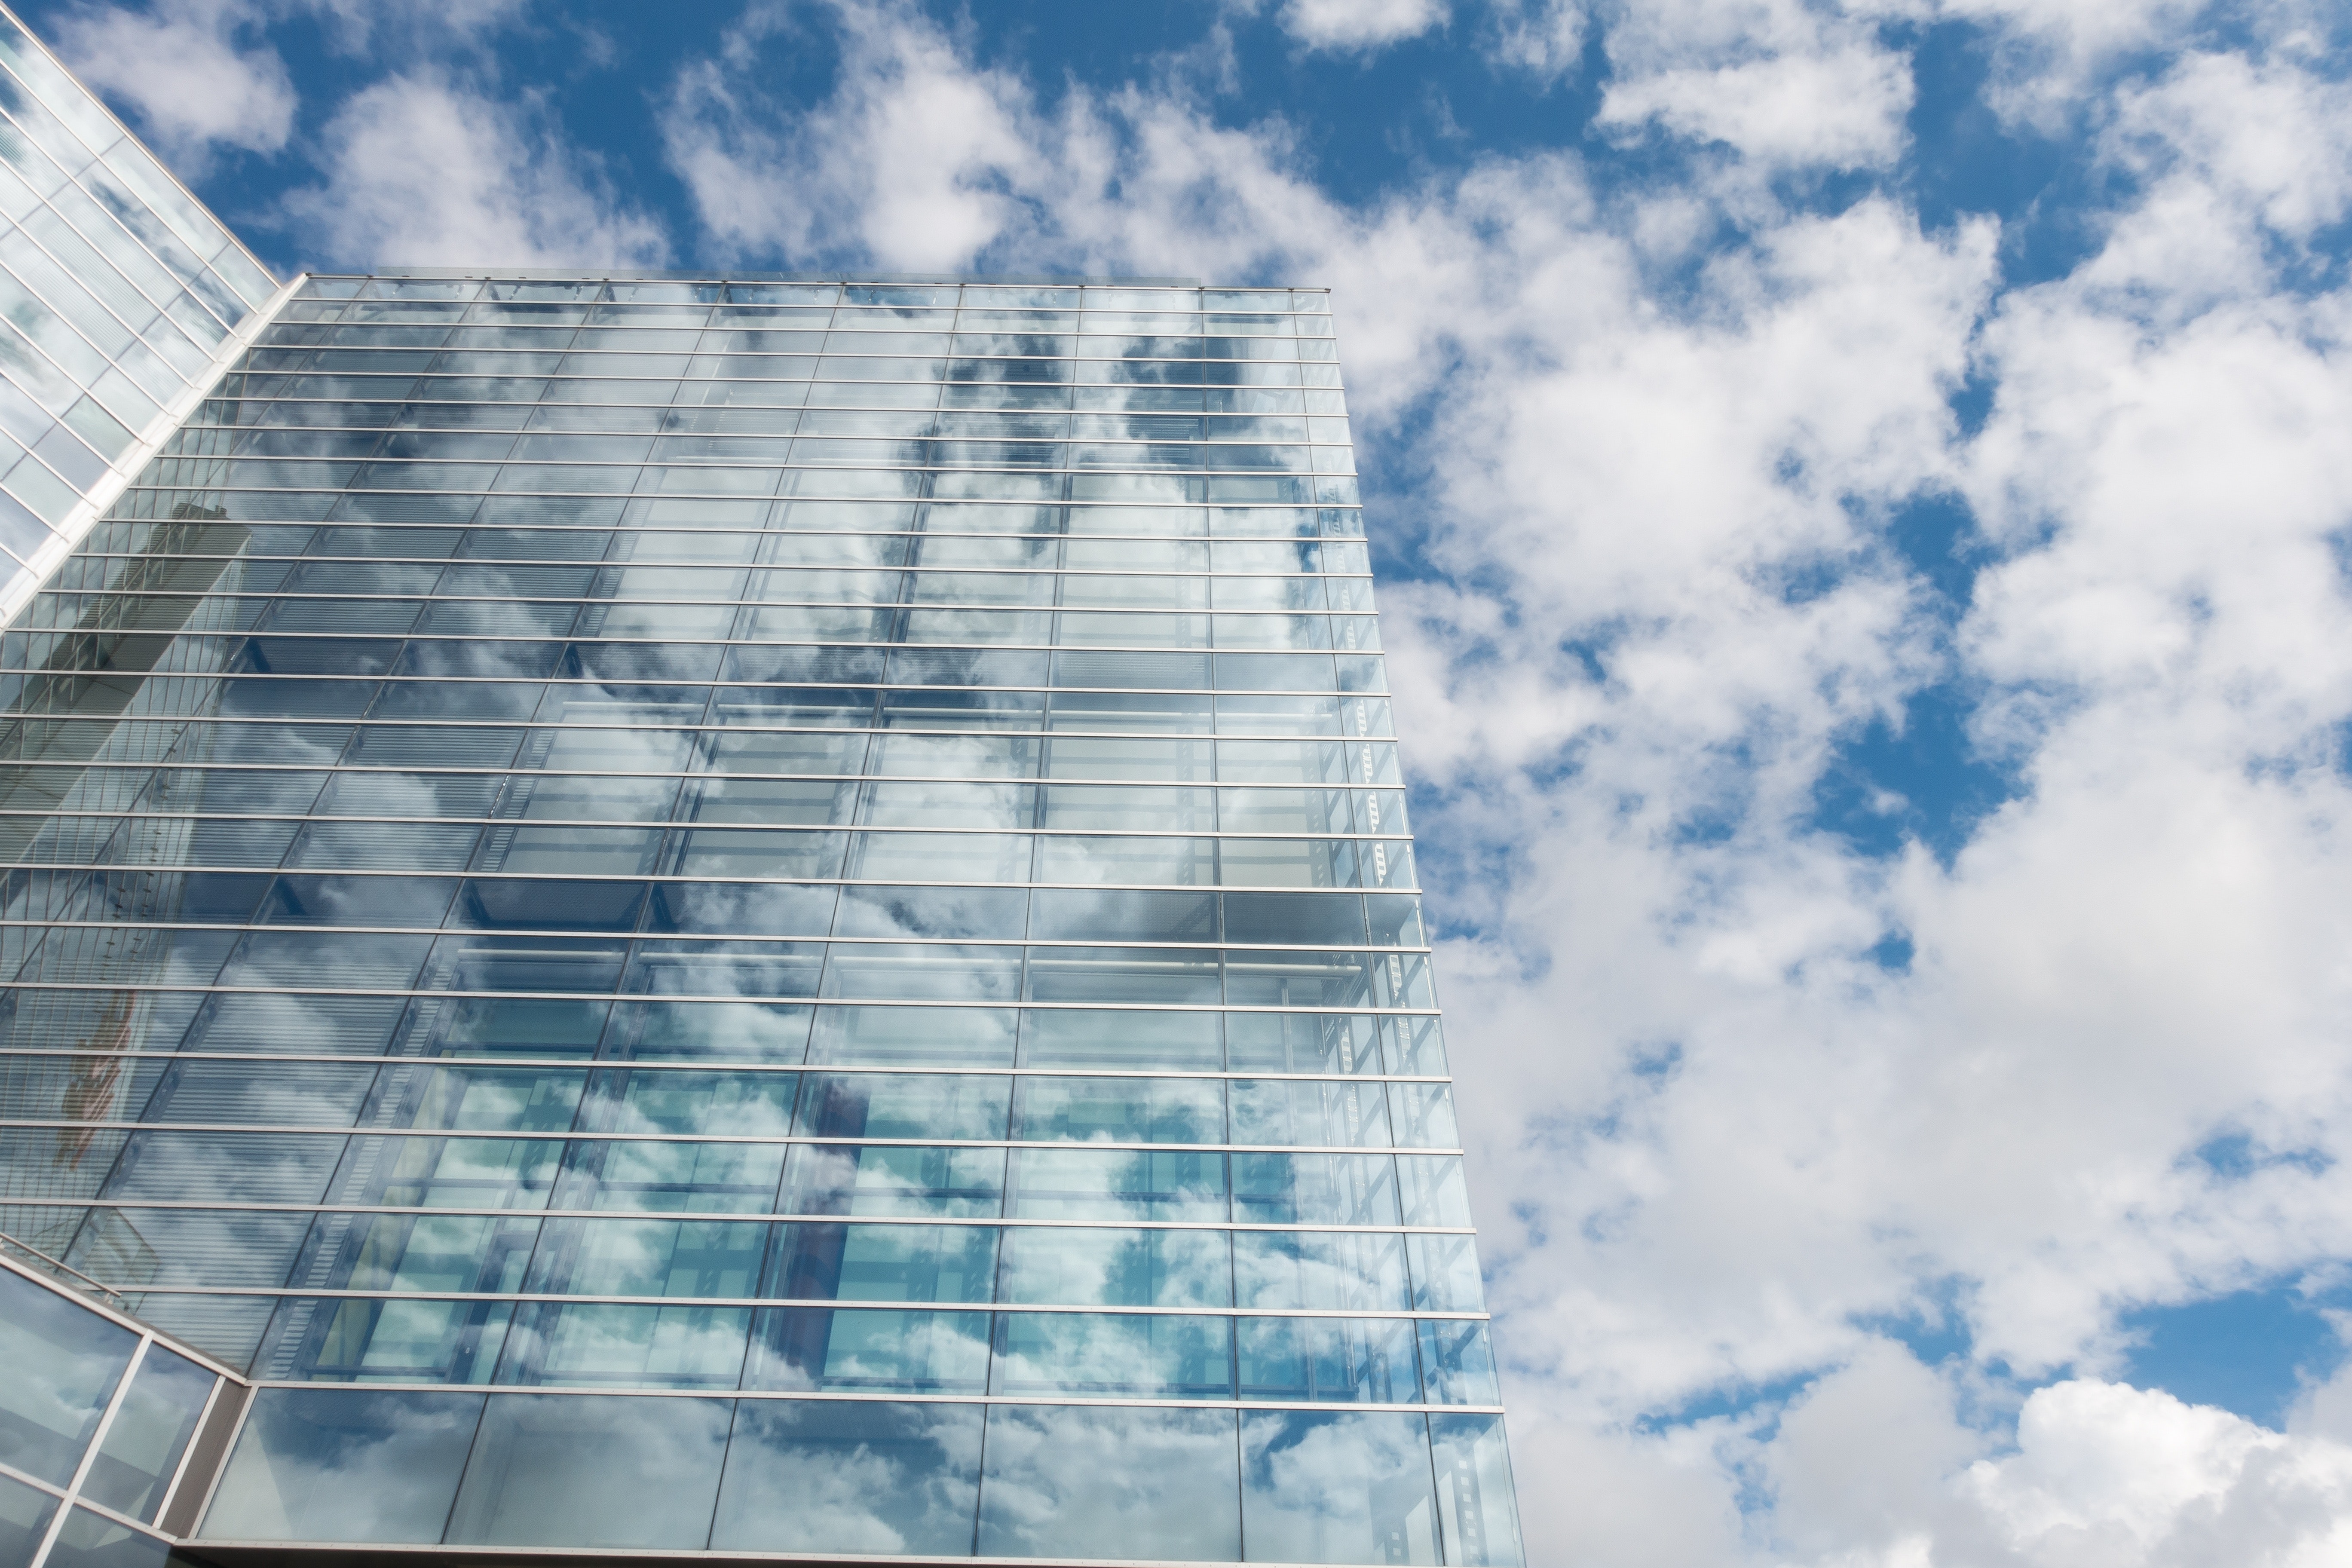 Bottom view of clear glass building under blue cloudy sky during day time photo